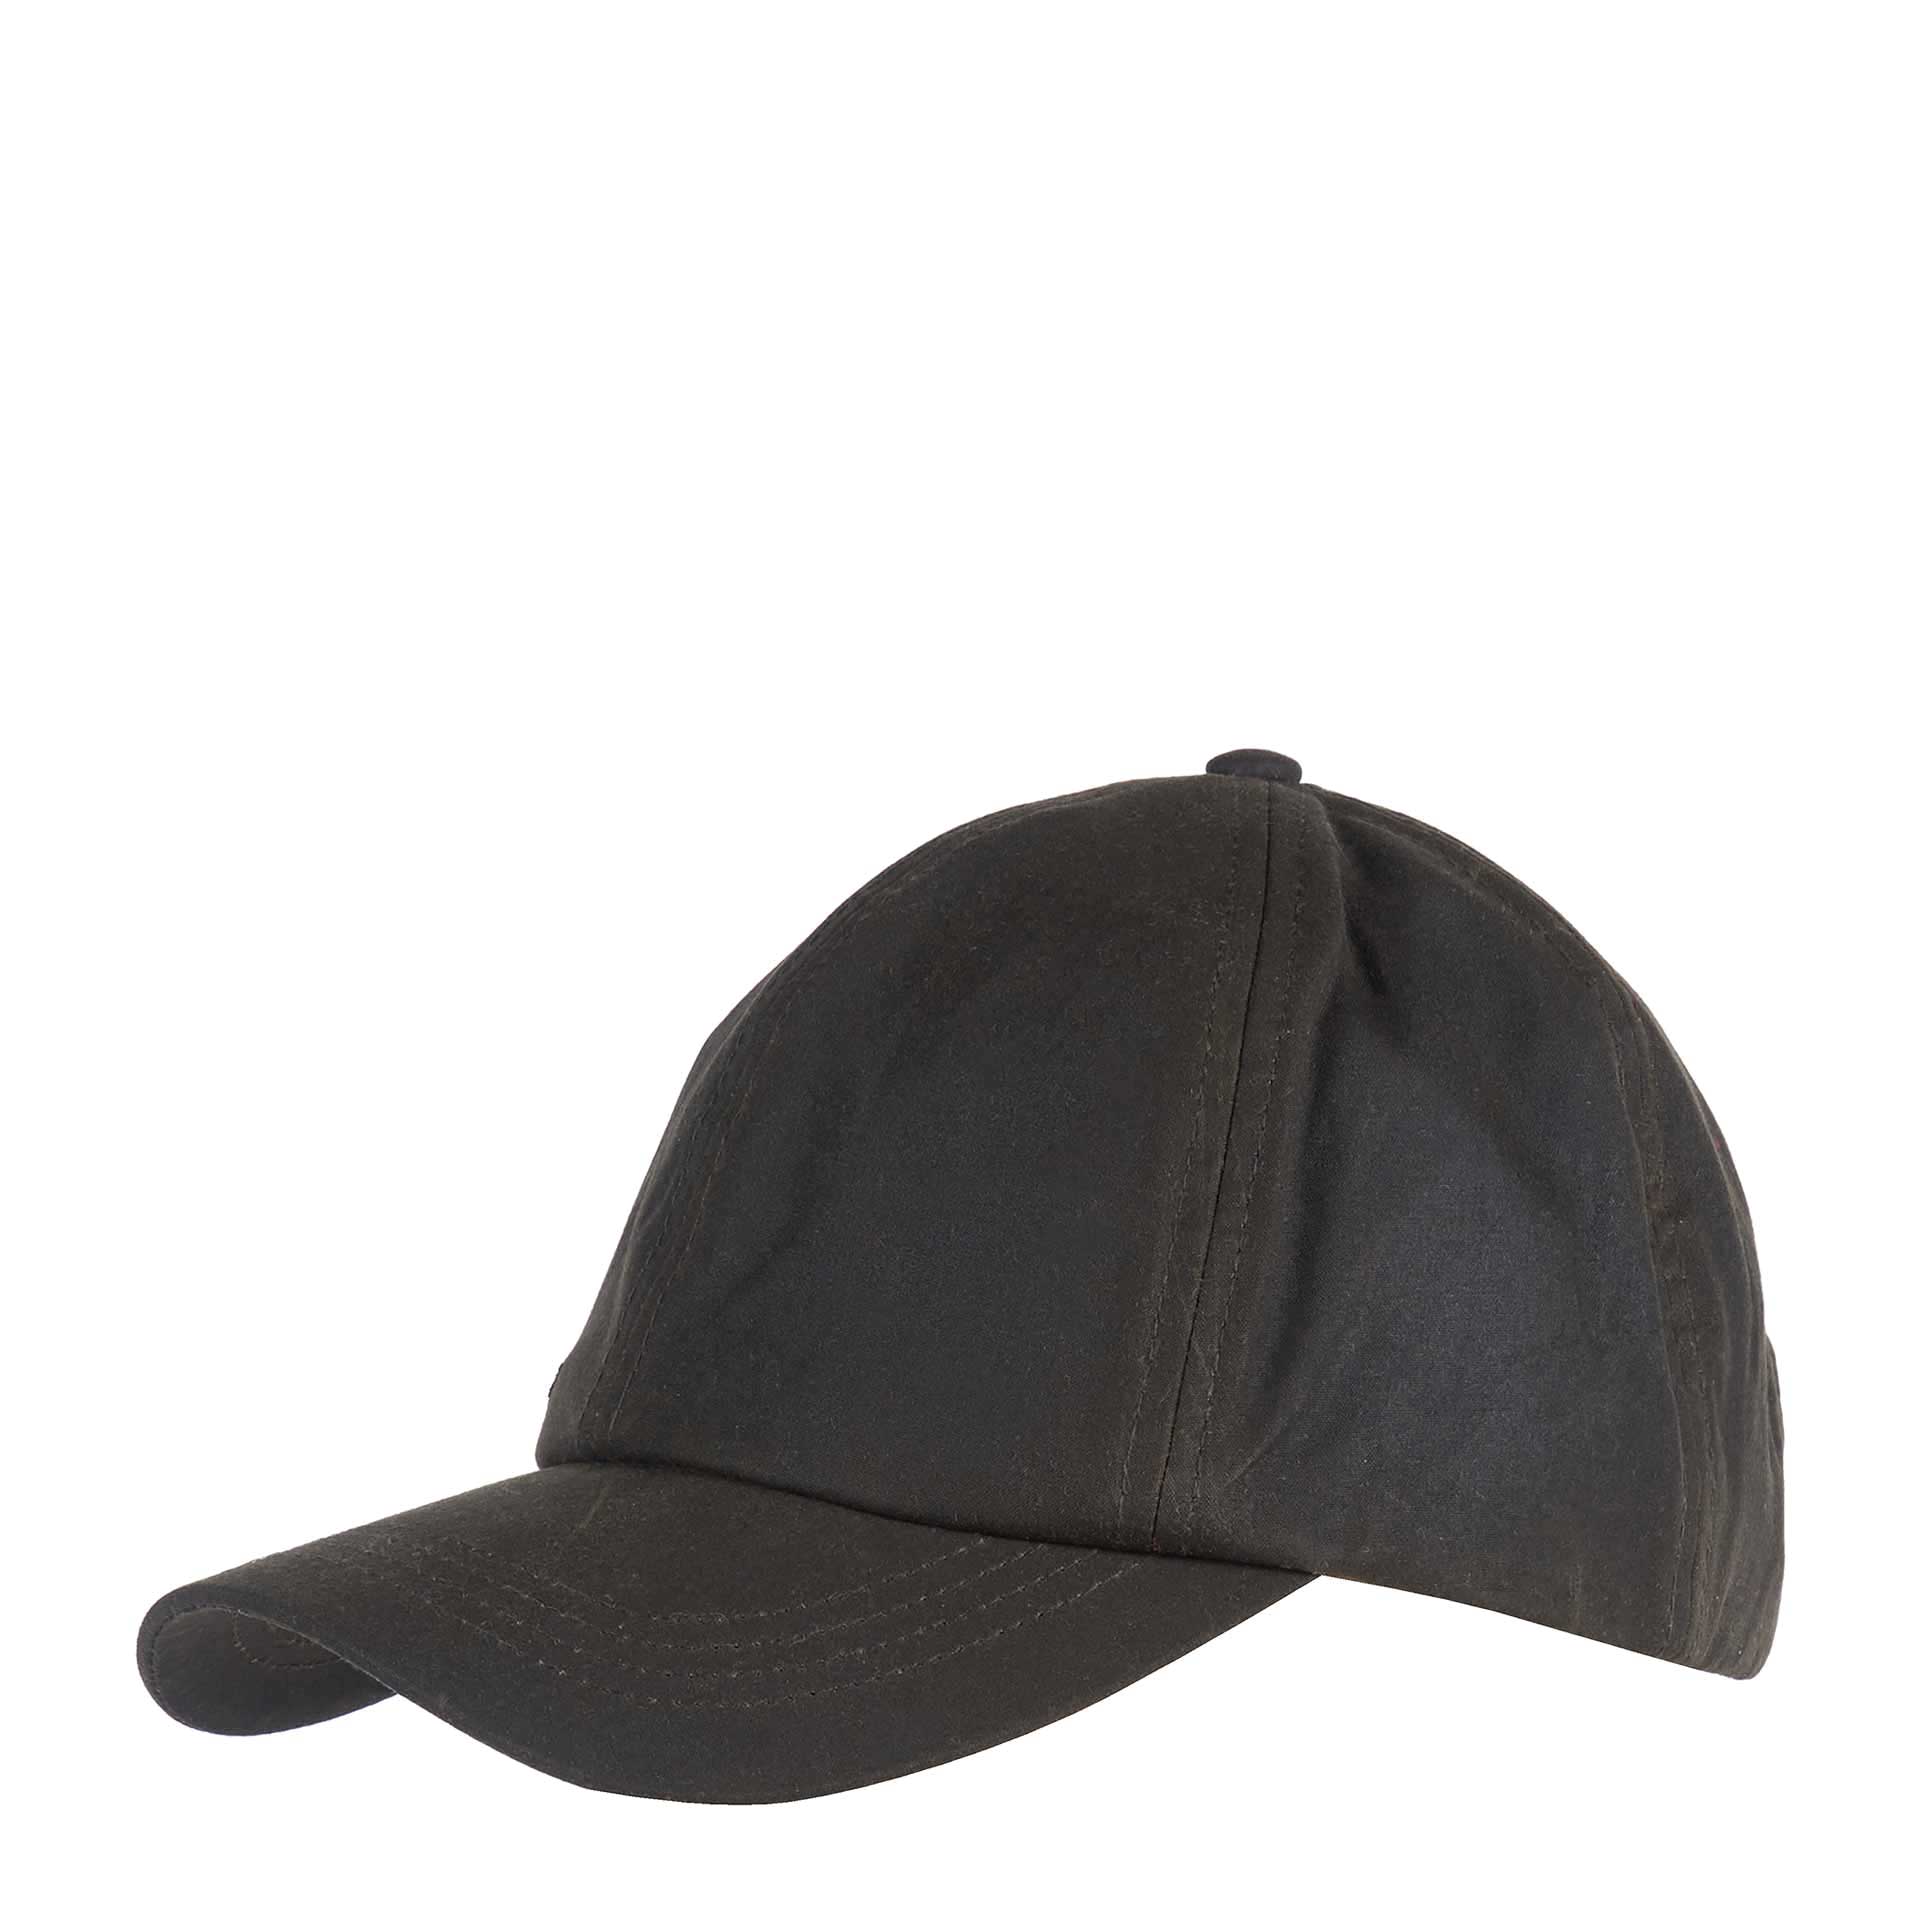 Barbour Wax Sports Cap olive